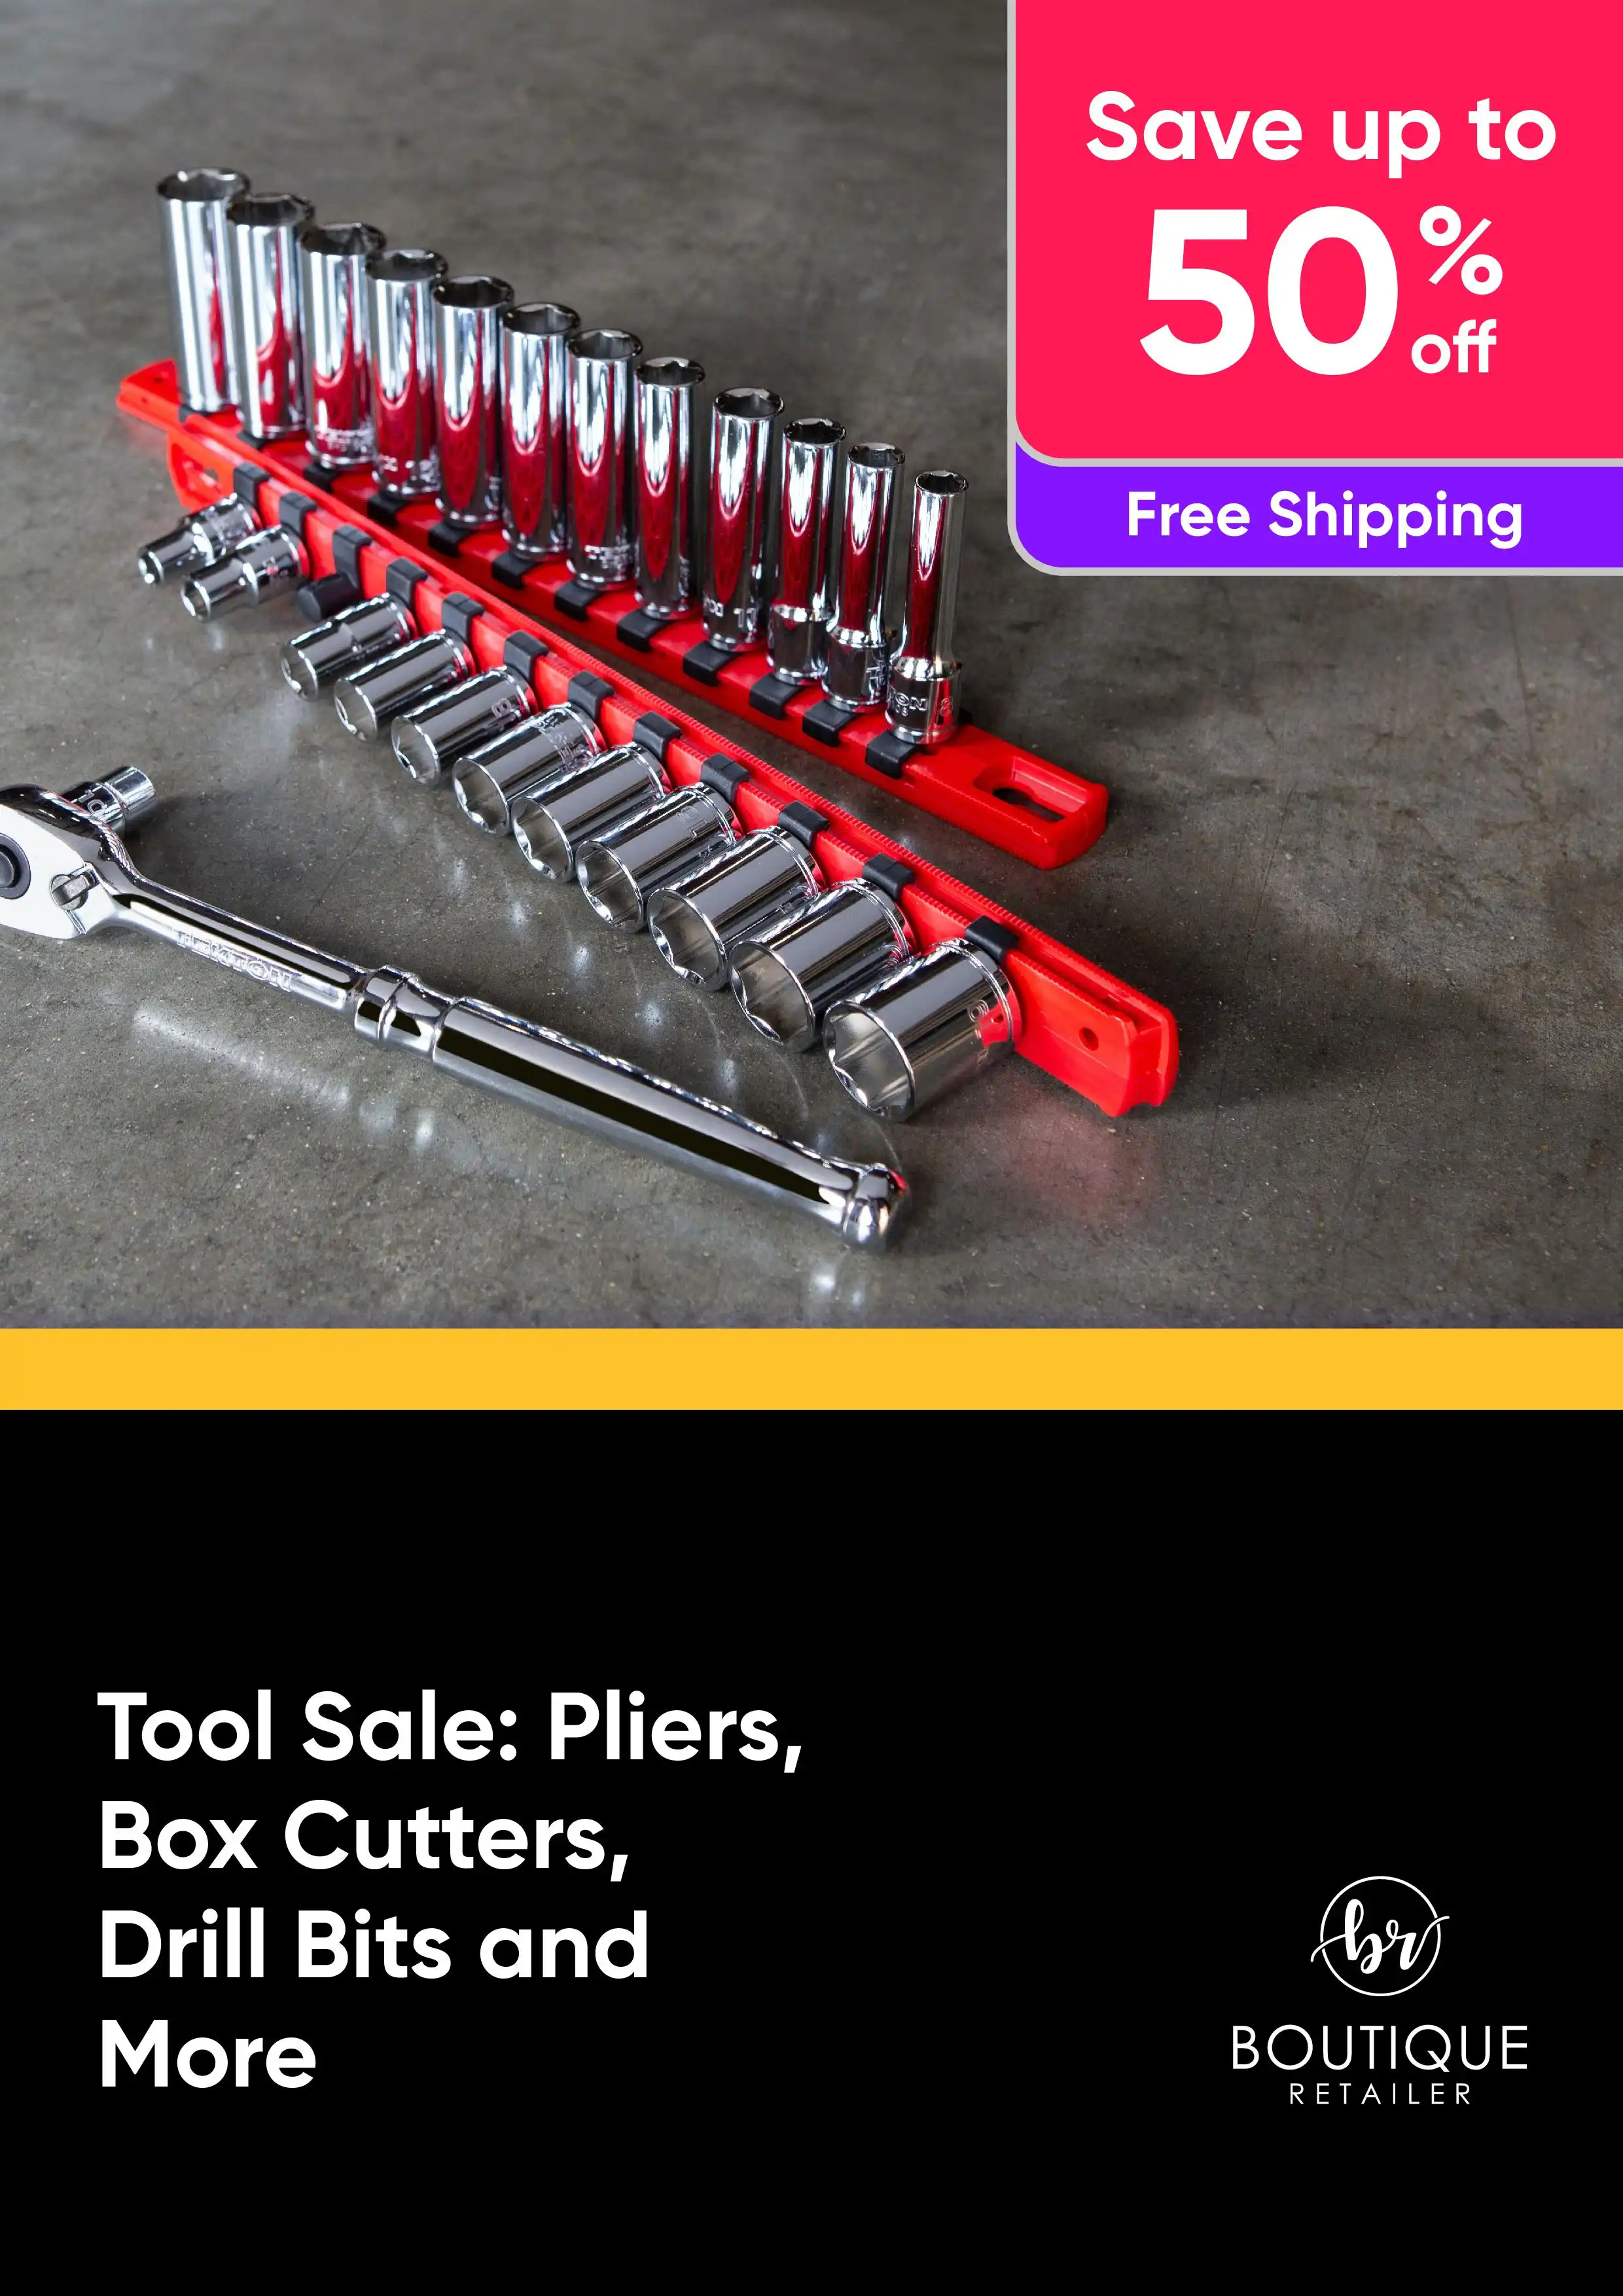 Tool Sale - Pliers, Box Cutters, Drill Bits and More - up to 50% off